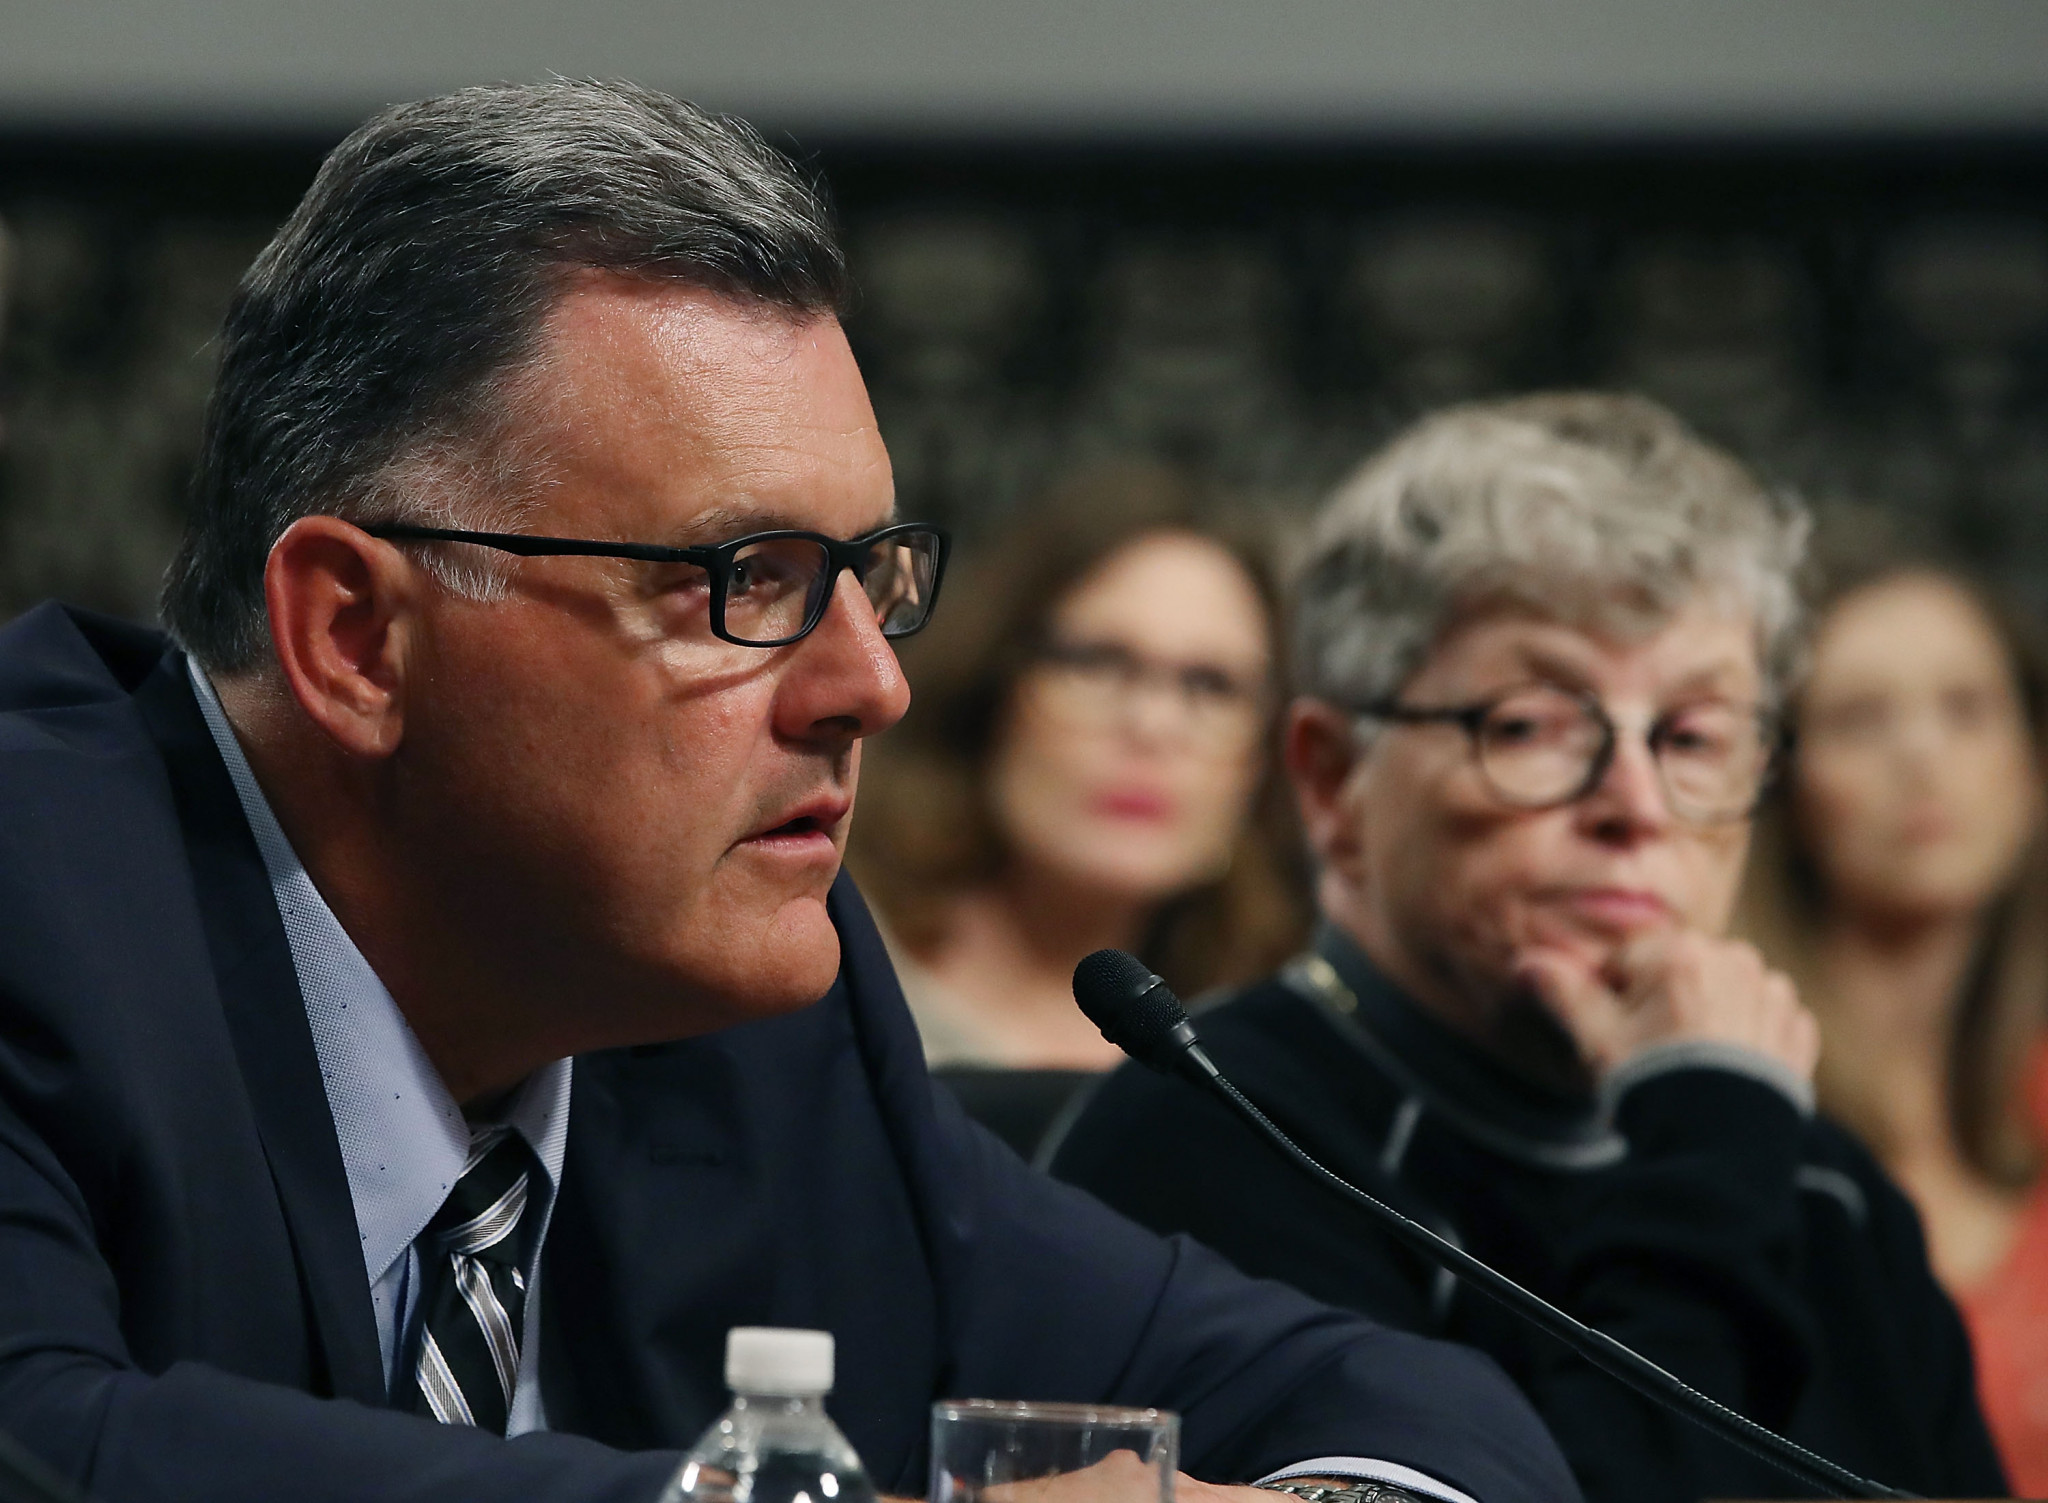 Former USA Gymnastics President and chief executive Steve Penny has pleaded not guilty to interfering with evidence relating to the Larry Nassar sexual abuse scandal ©Getty Images